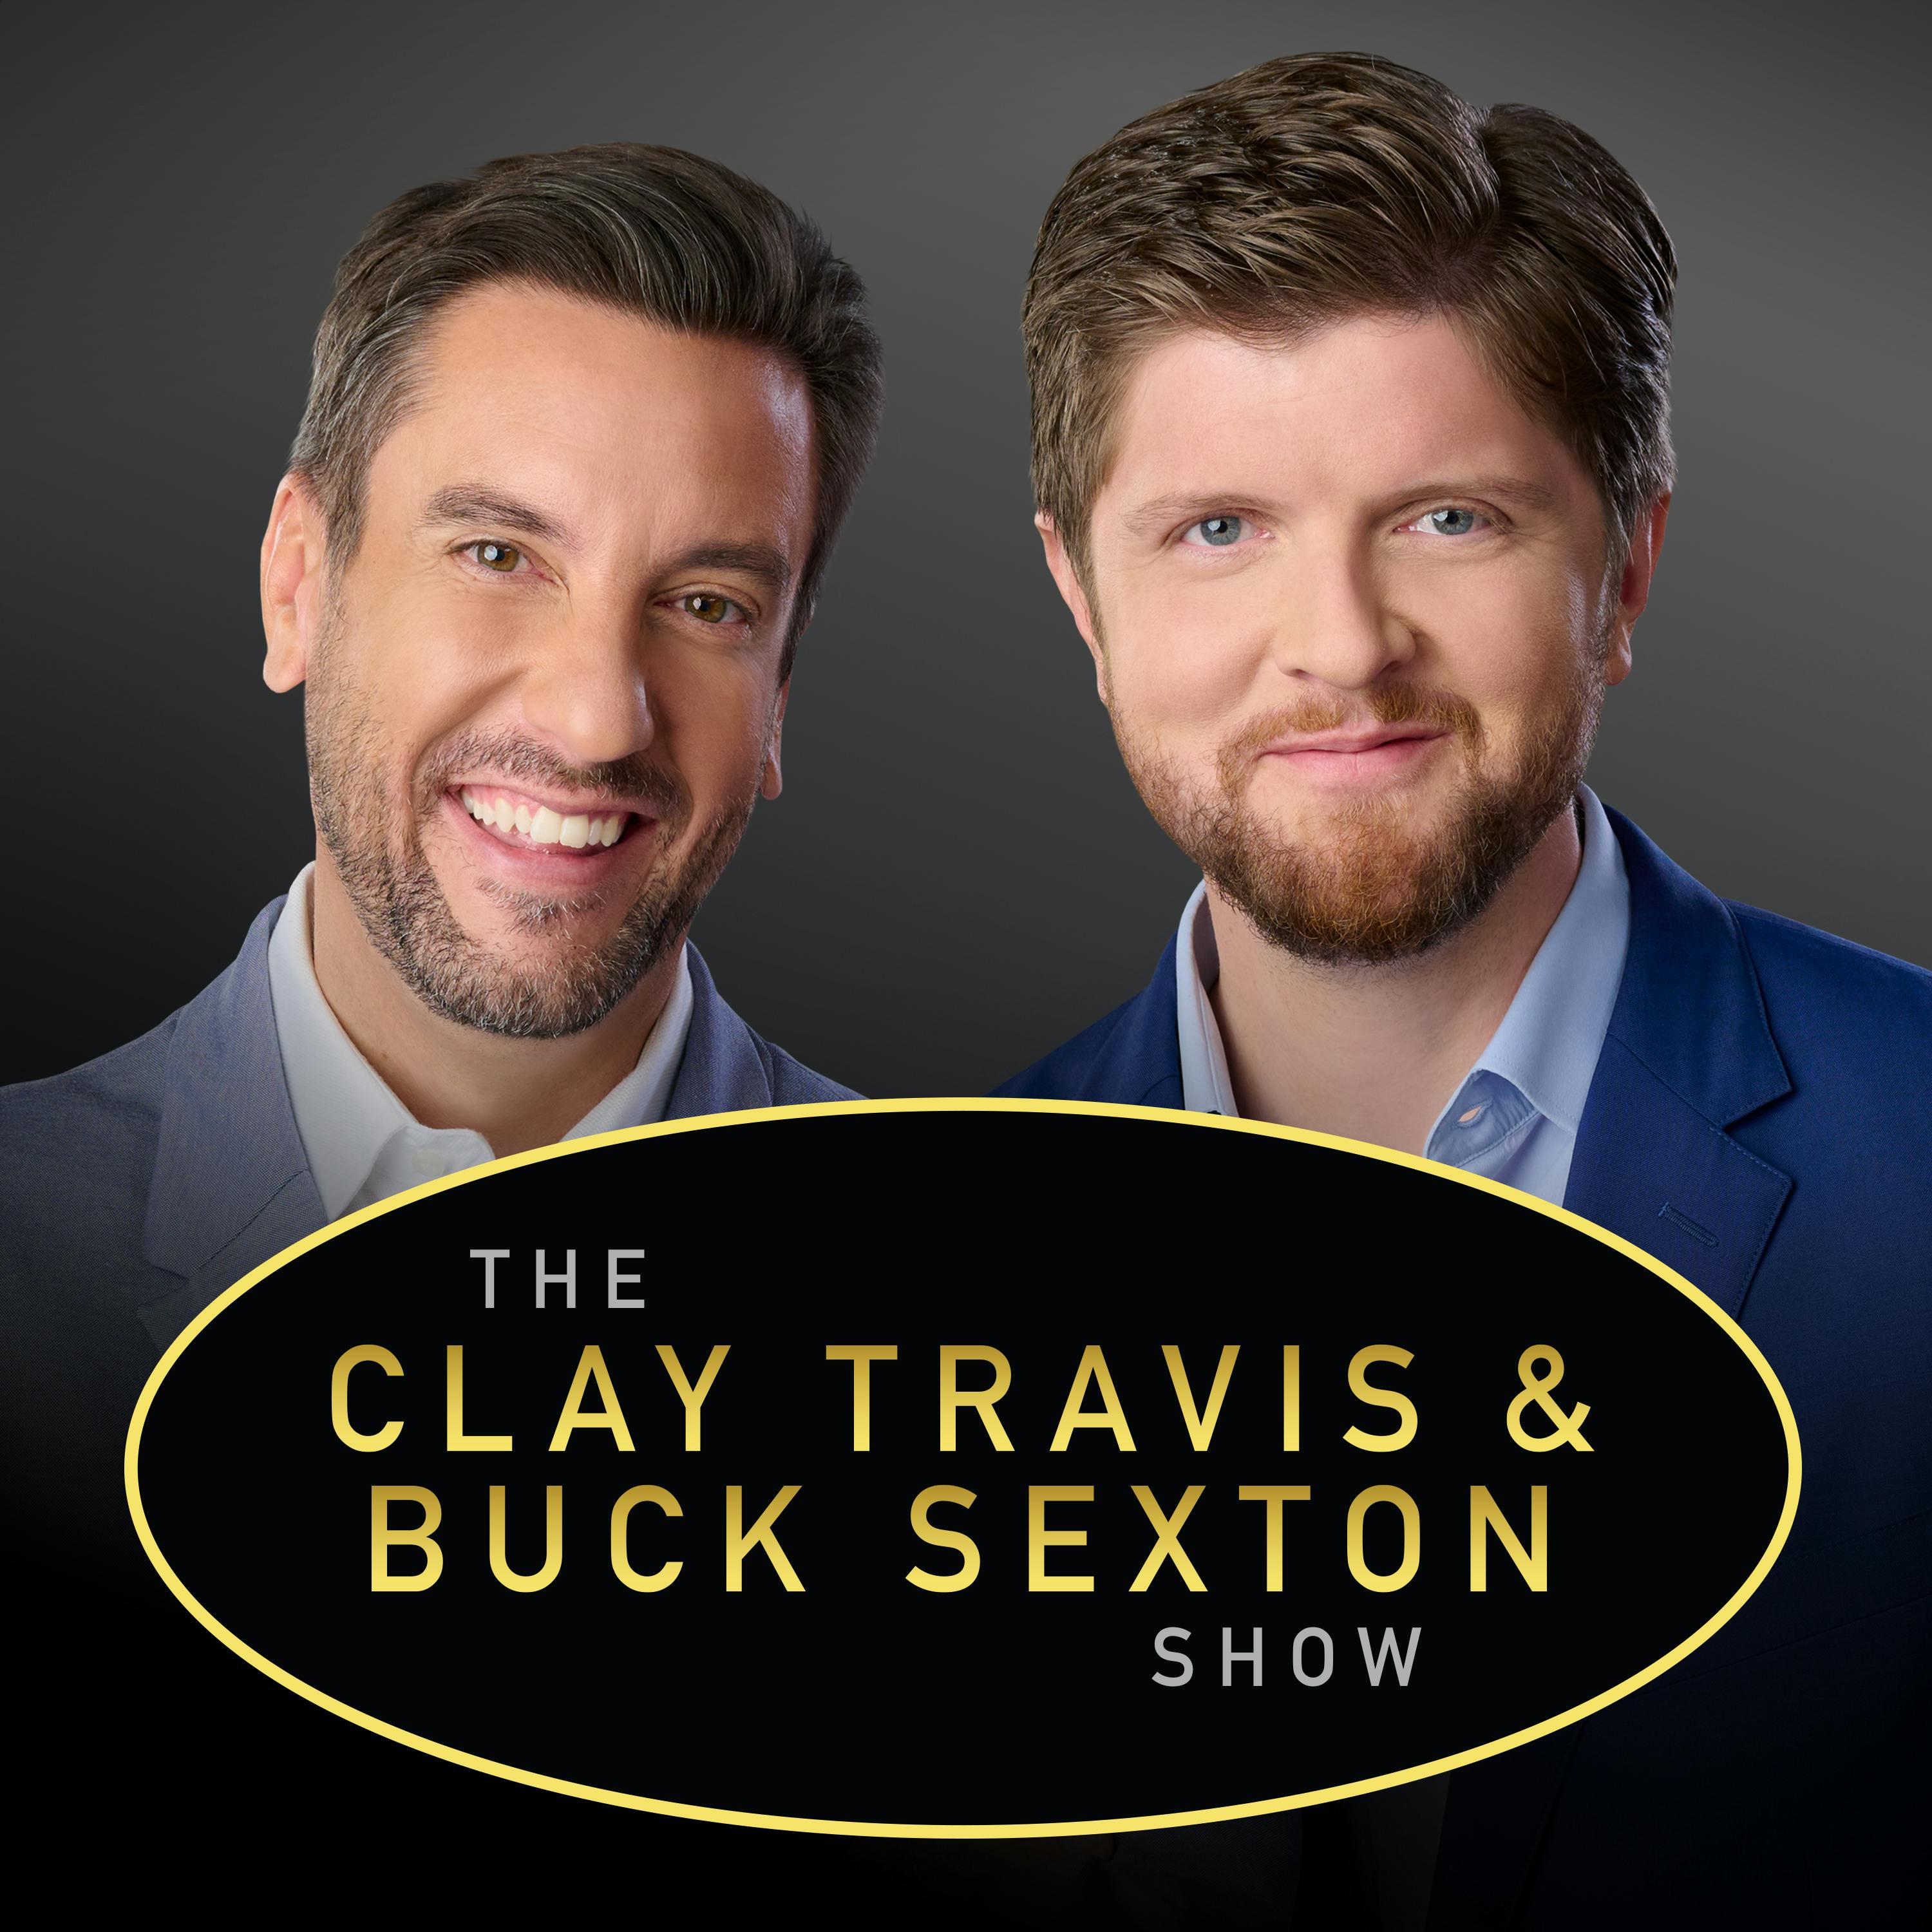 Clay Travis and Buck Sexton Show H1 – Jan 21 2022